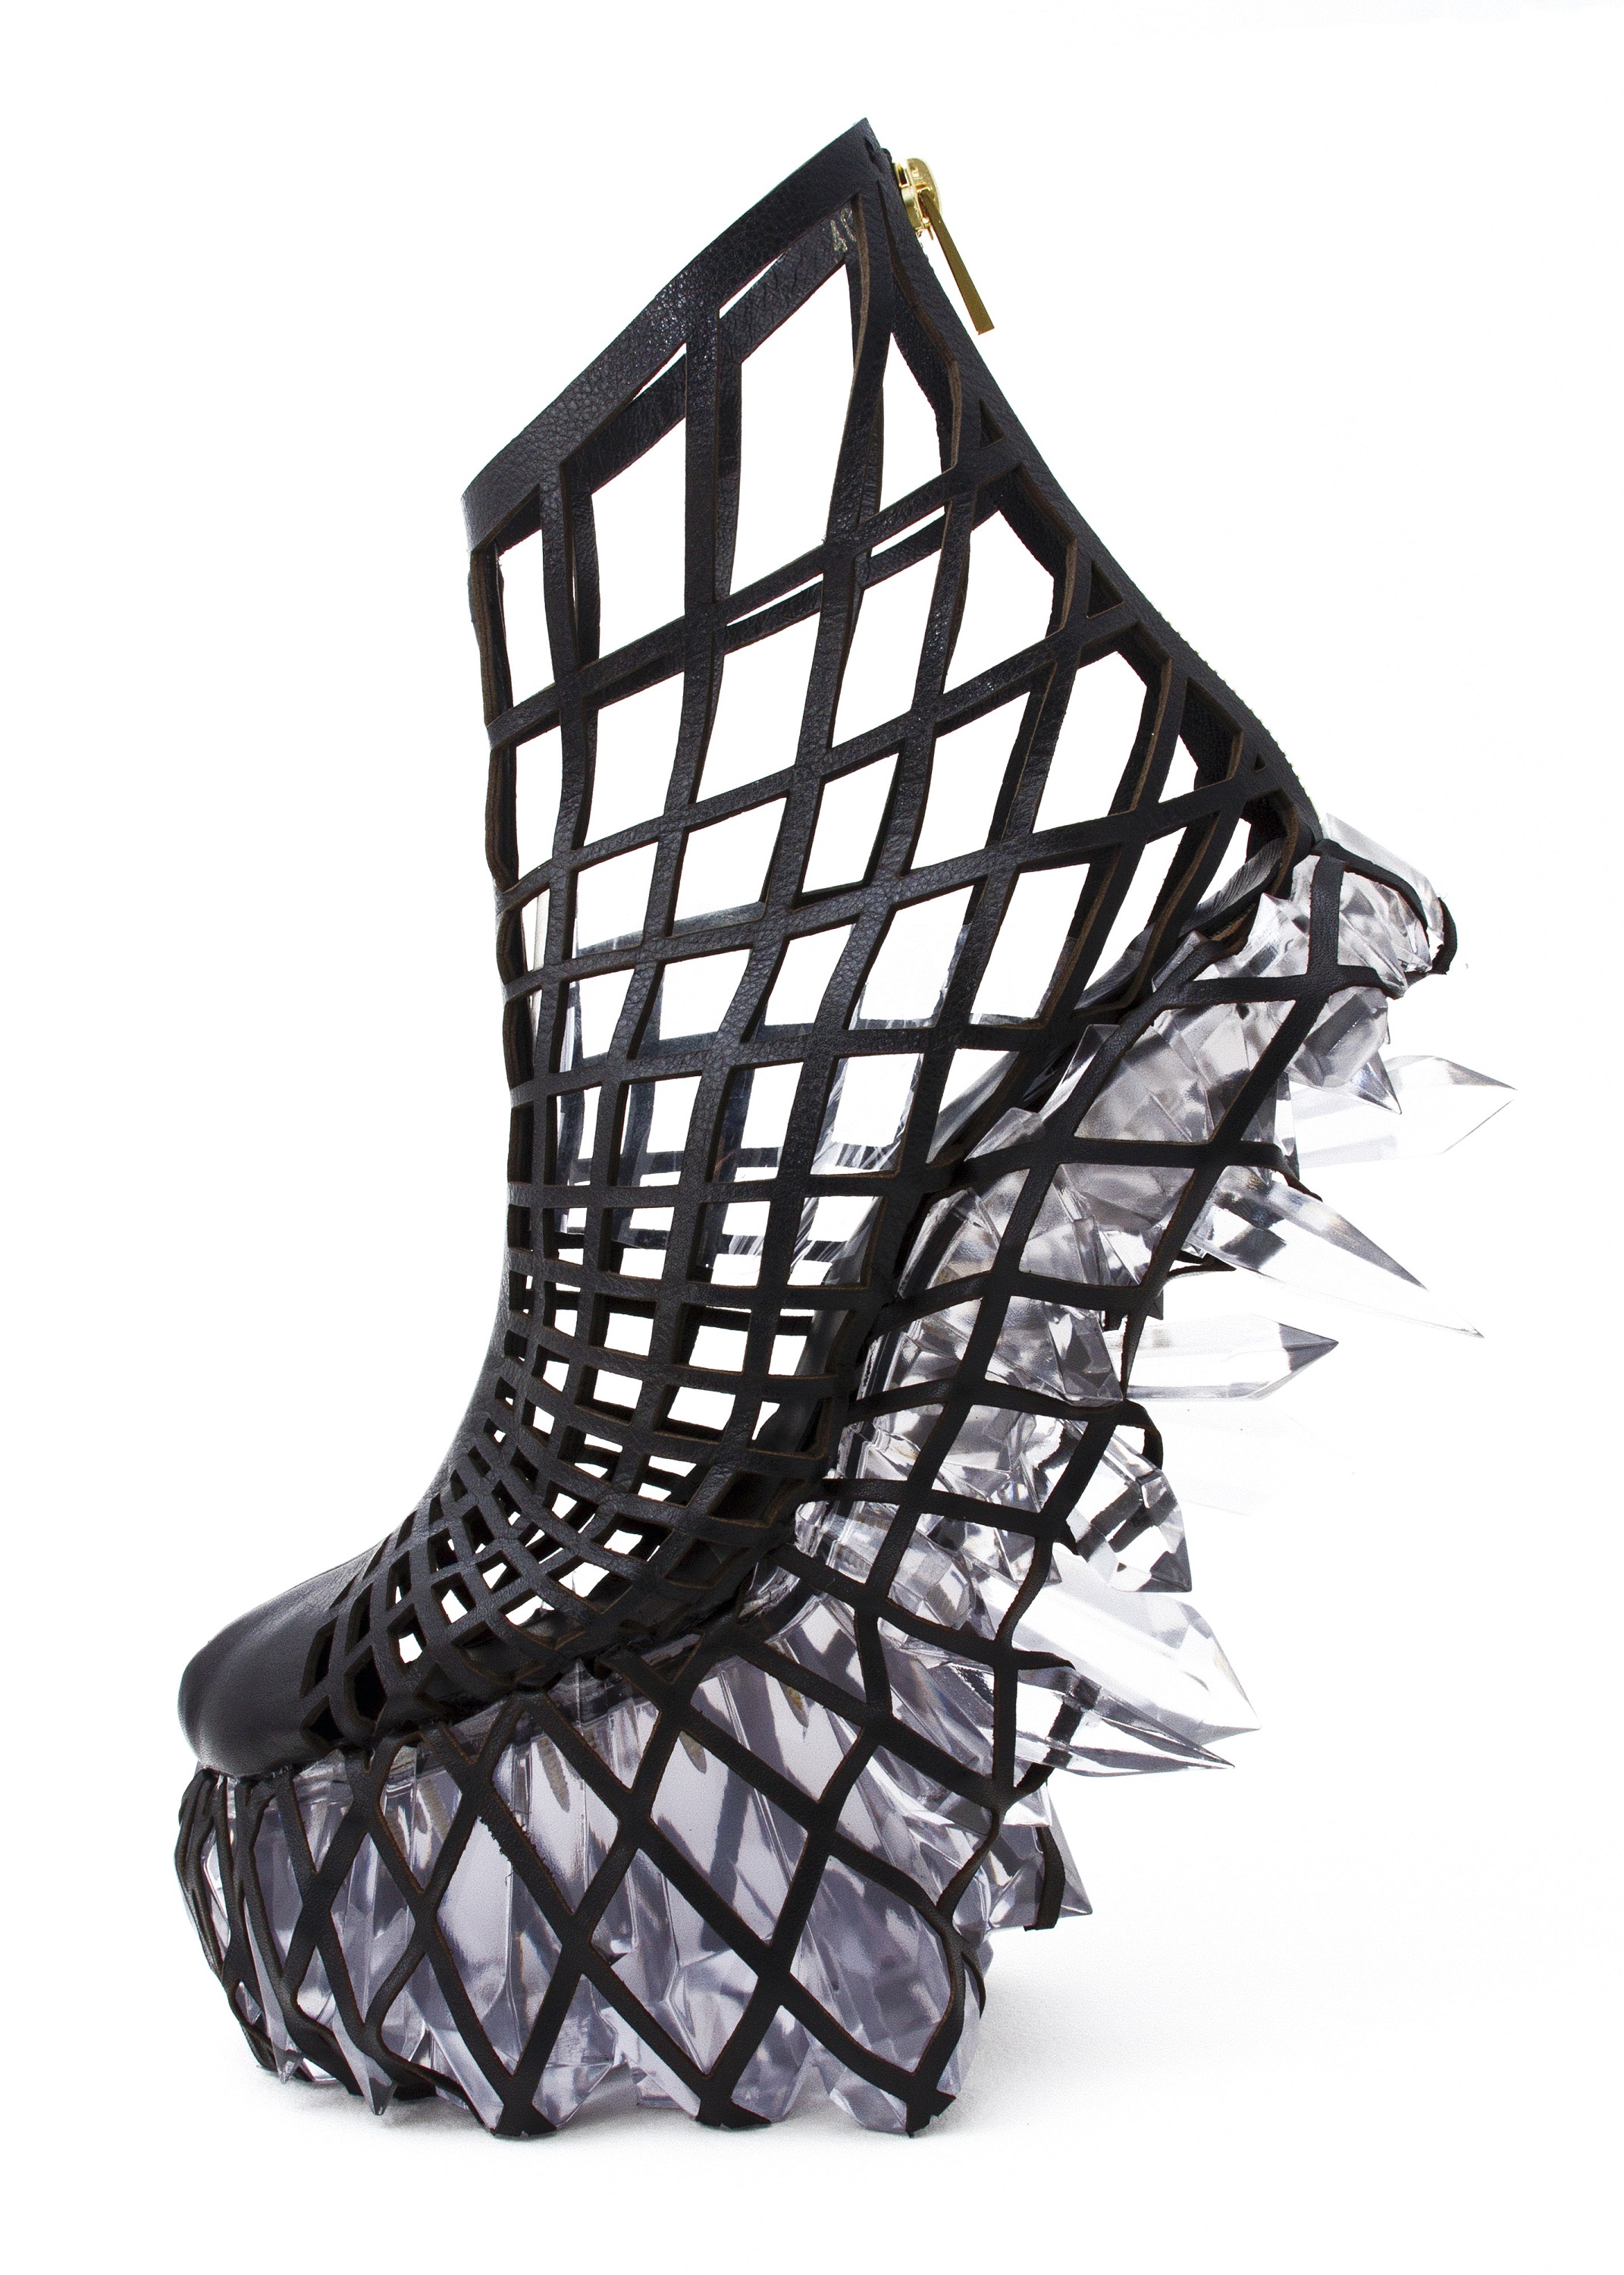 High-heel shoe made of a woven black material with a zipper at back. In place of a sole, it has jagged crystals on the base, and sticking out from the heel.